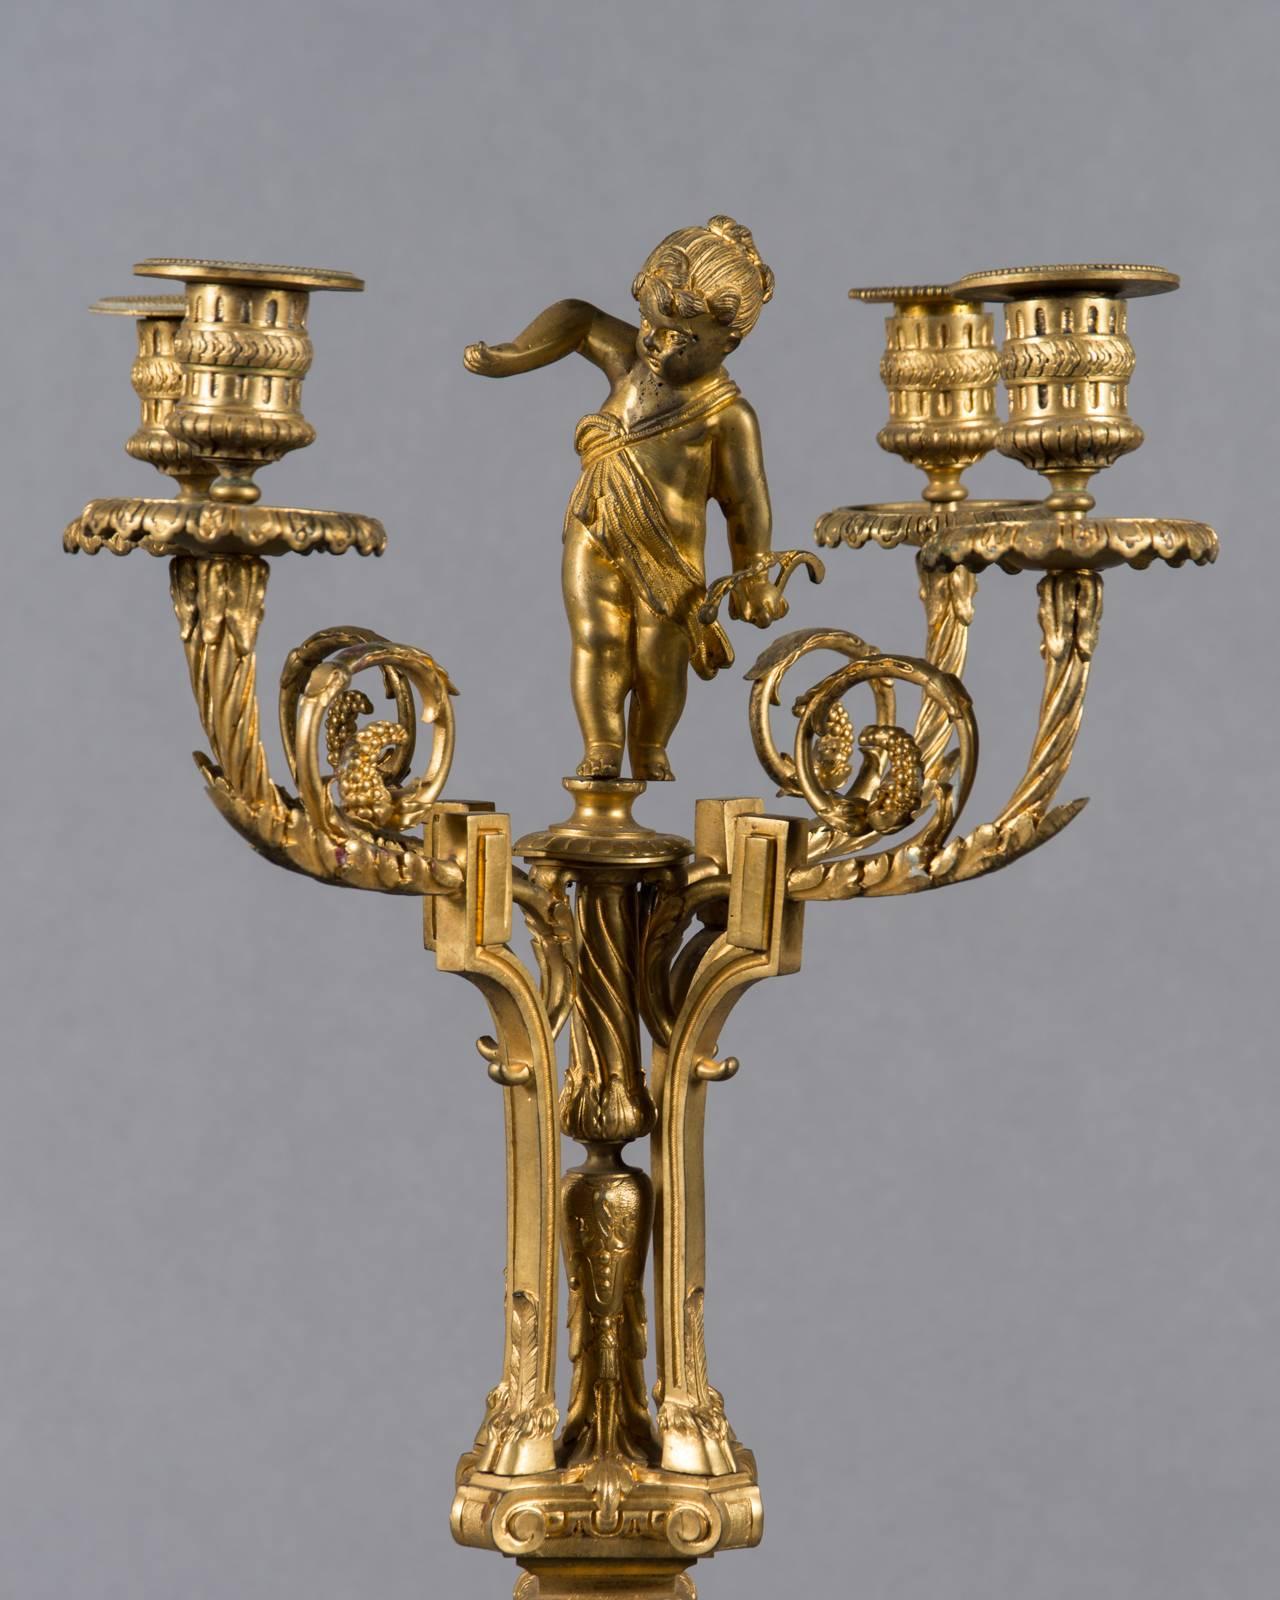 Pair of 19th Century French Gilt Bronze Four-Branch Figural Candelabras For Sale 2